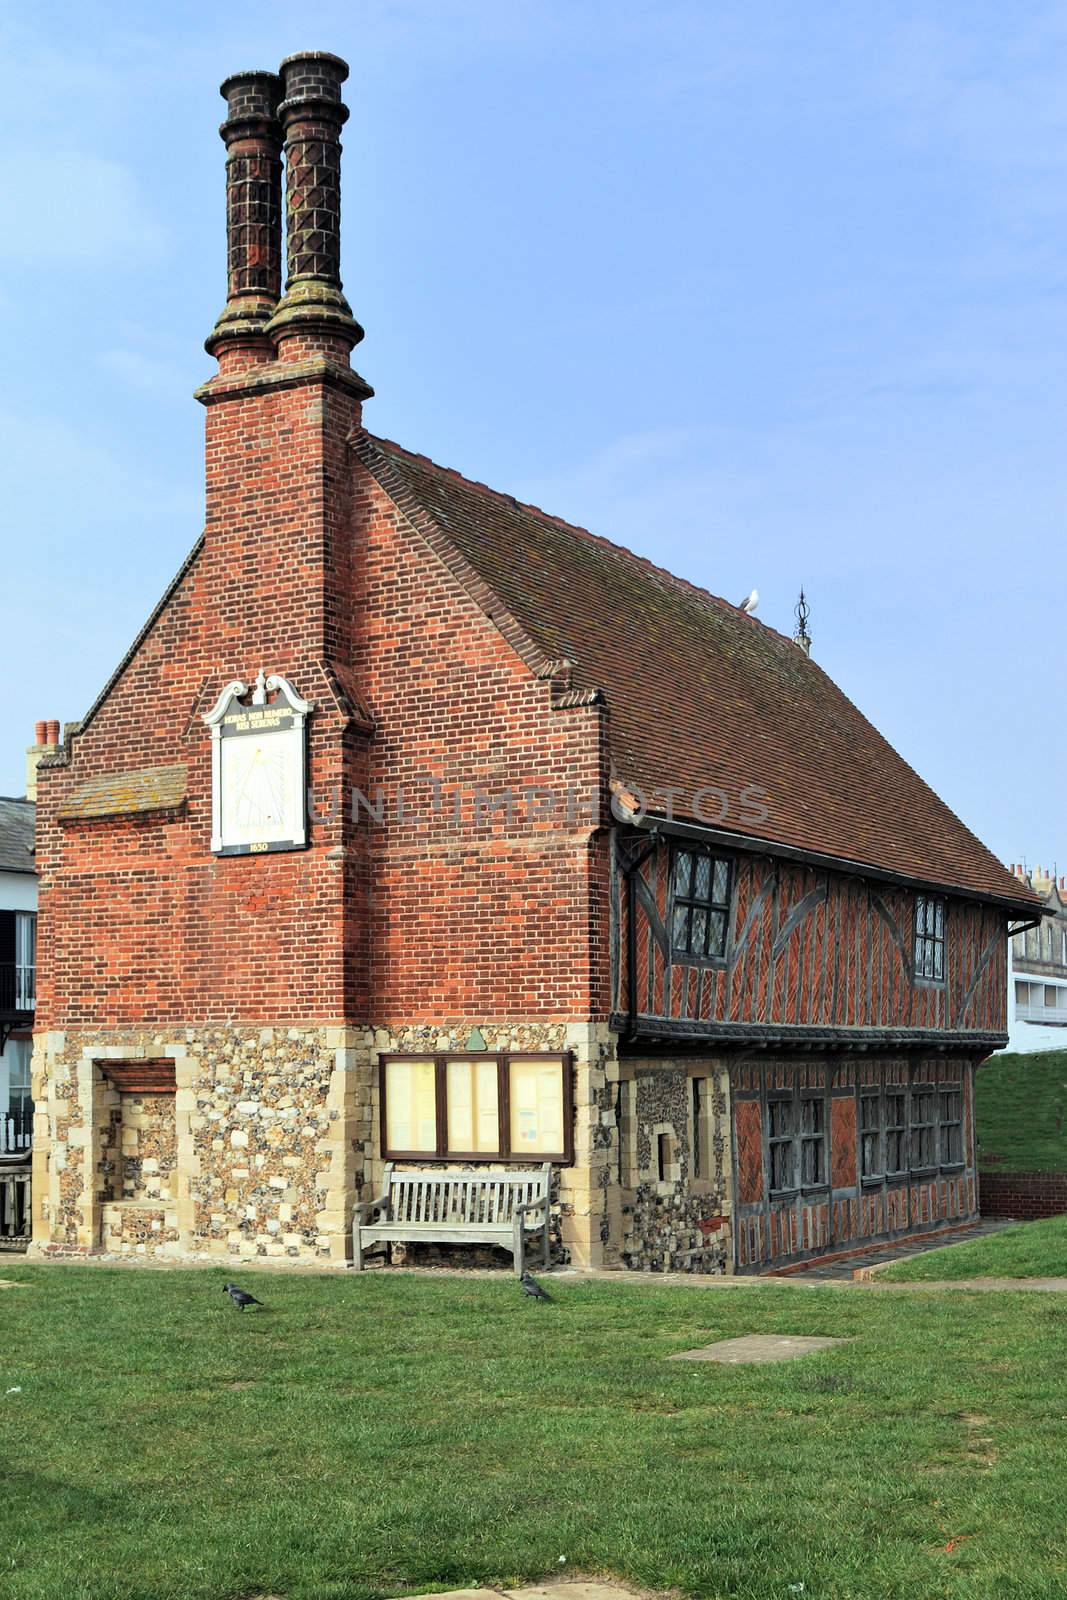 Moot hall in England